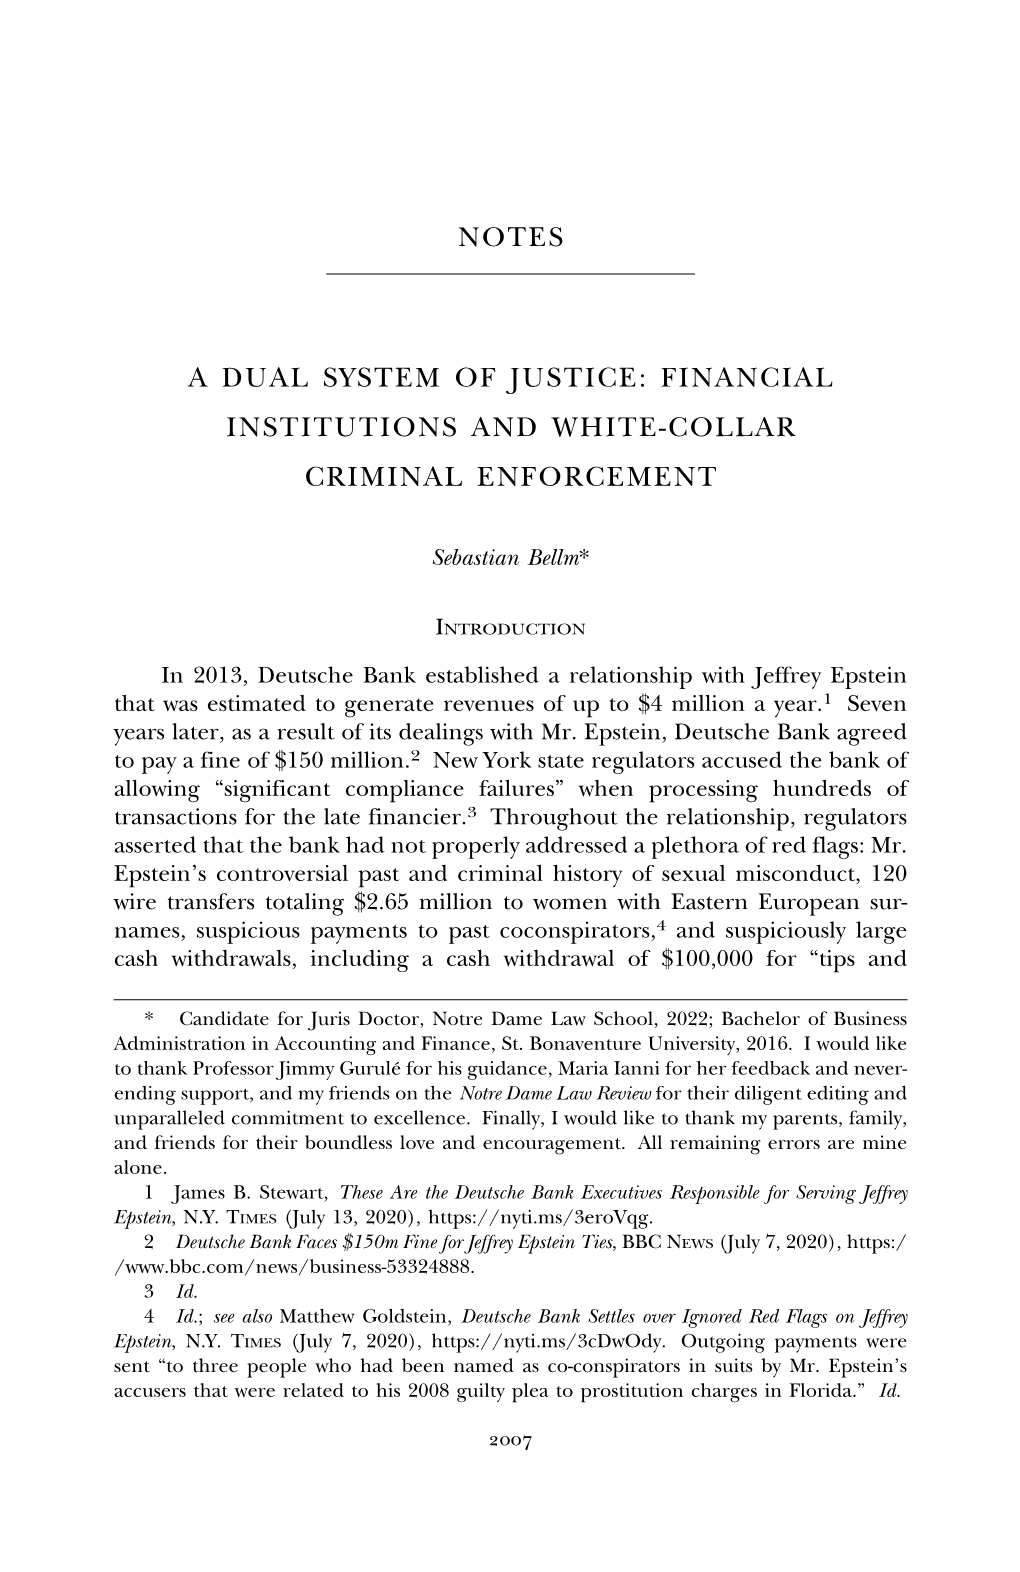 Notes a Dual System of Justice: Financial Institutions and White-Collar Criminal Enforcement